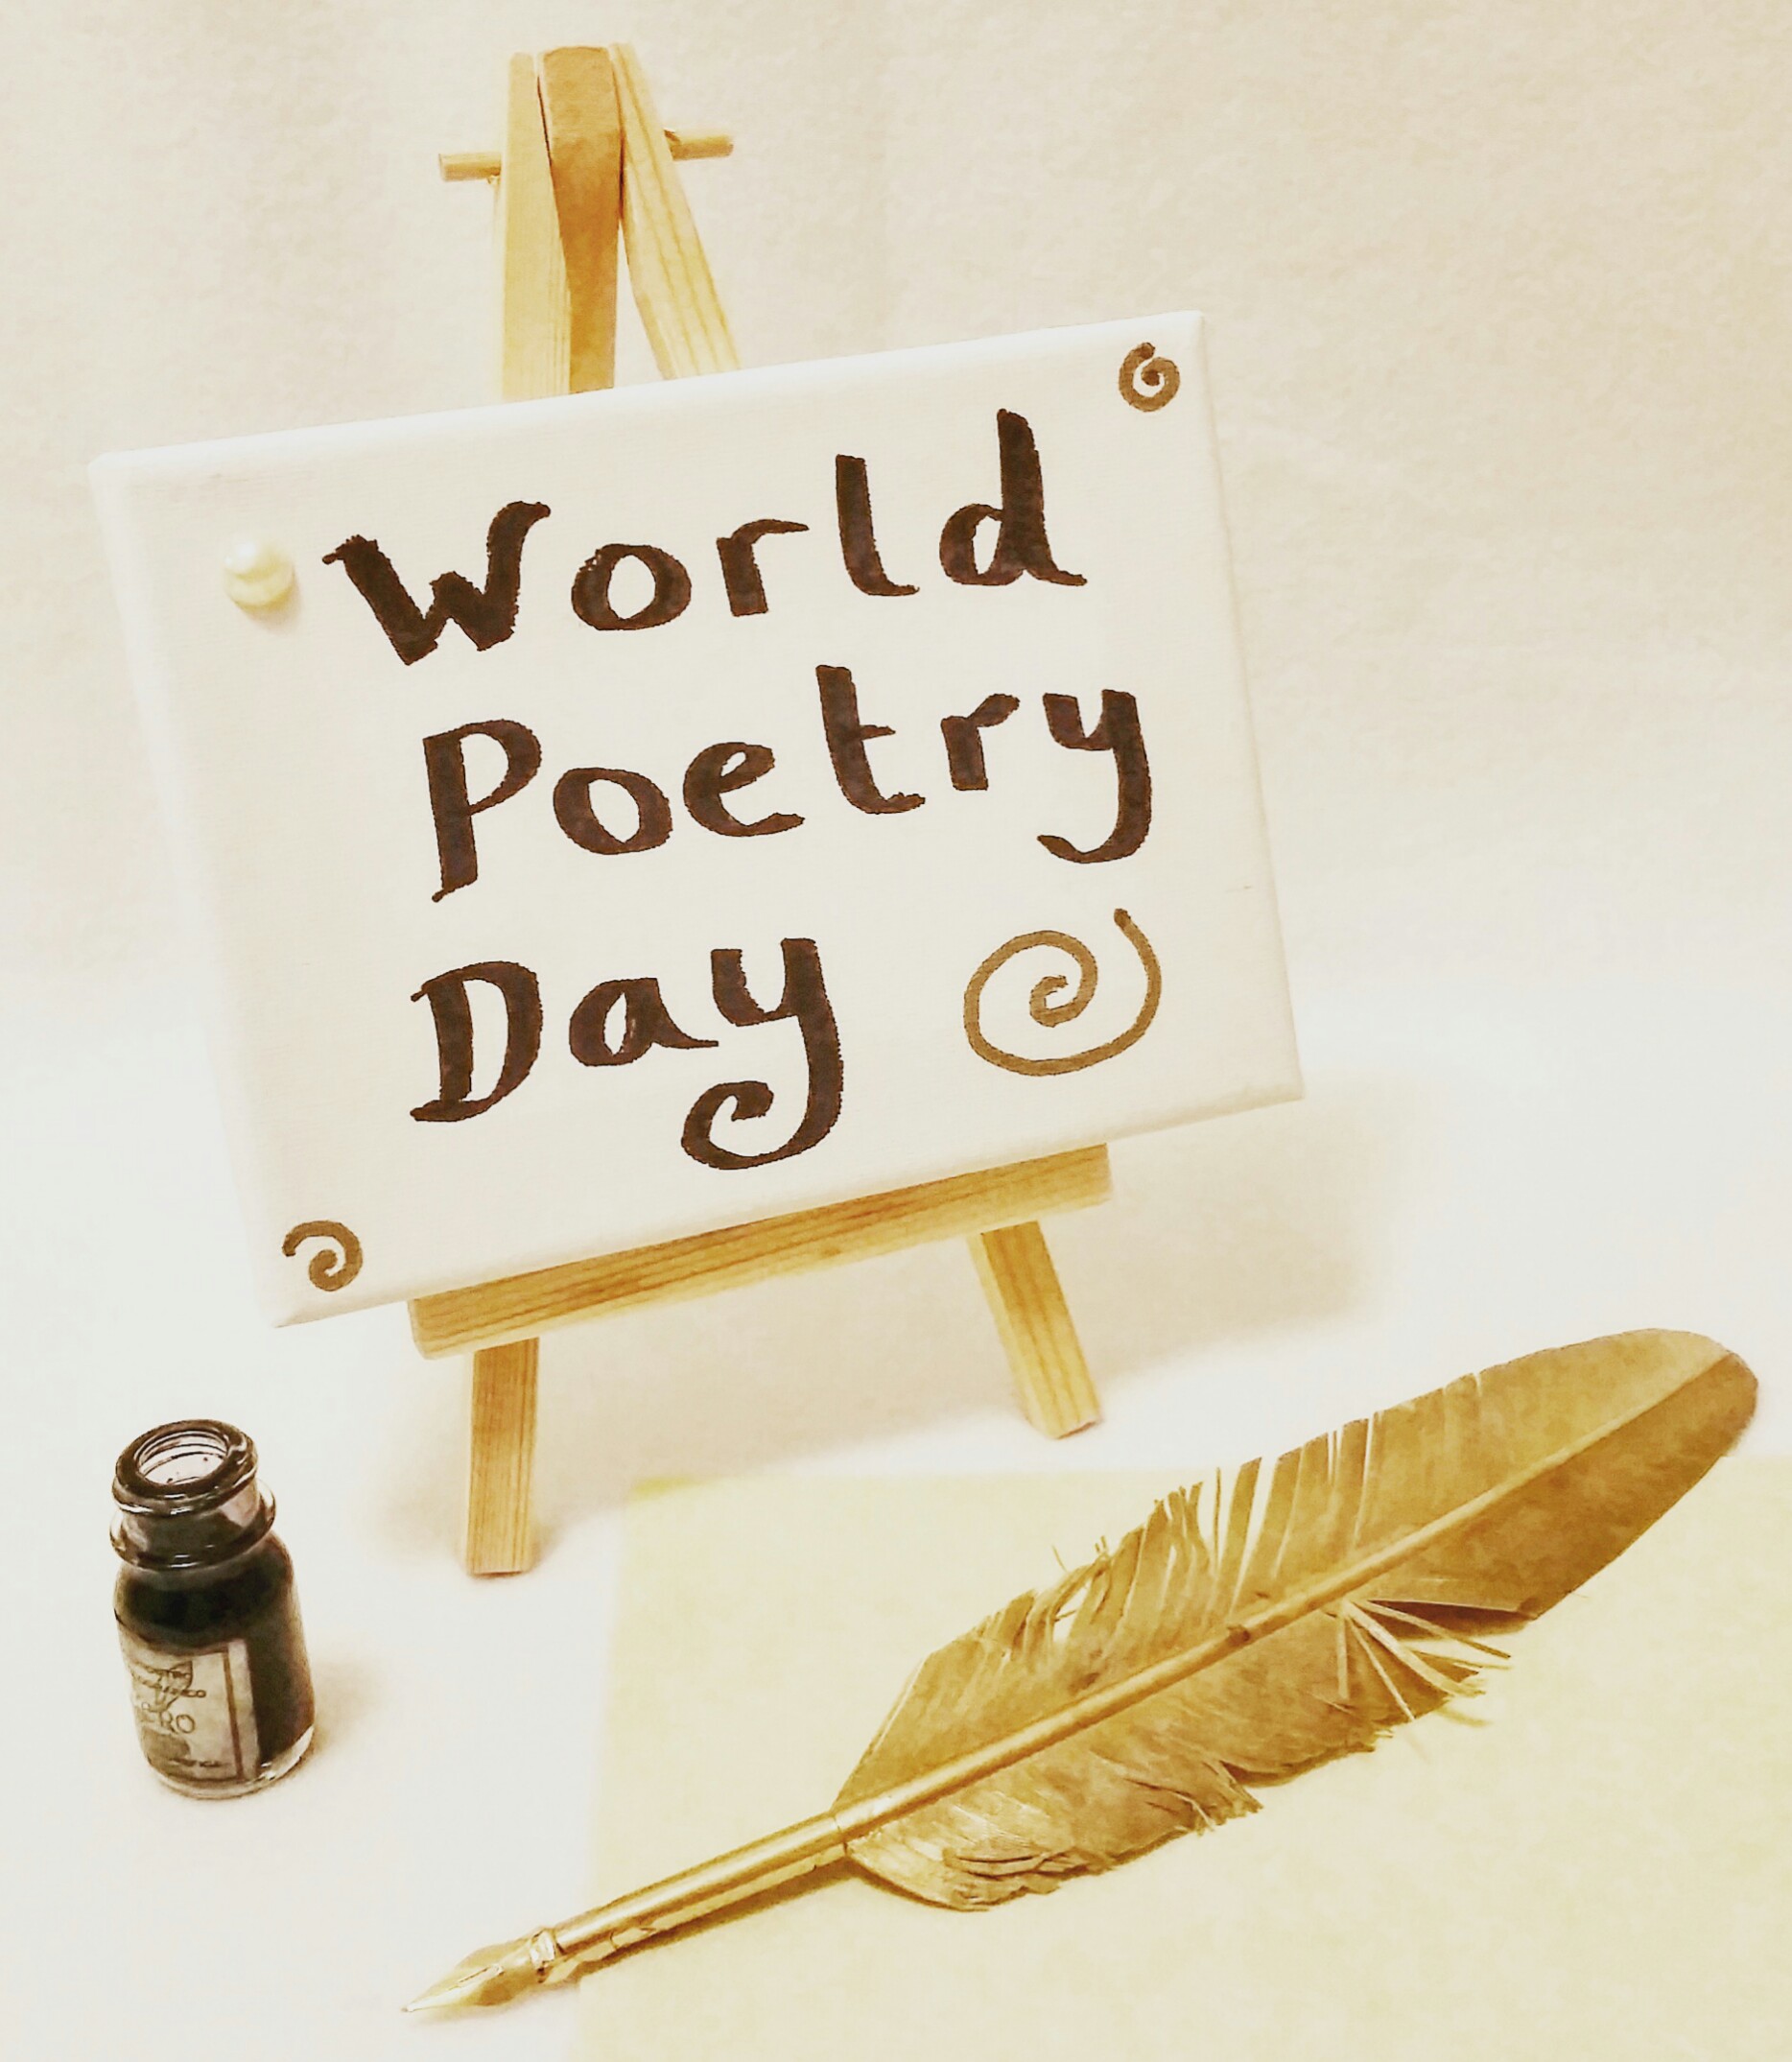 World Poetry Day, poems, activities at home, events, Home Education, poetry, writing